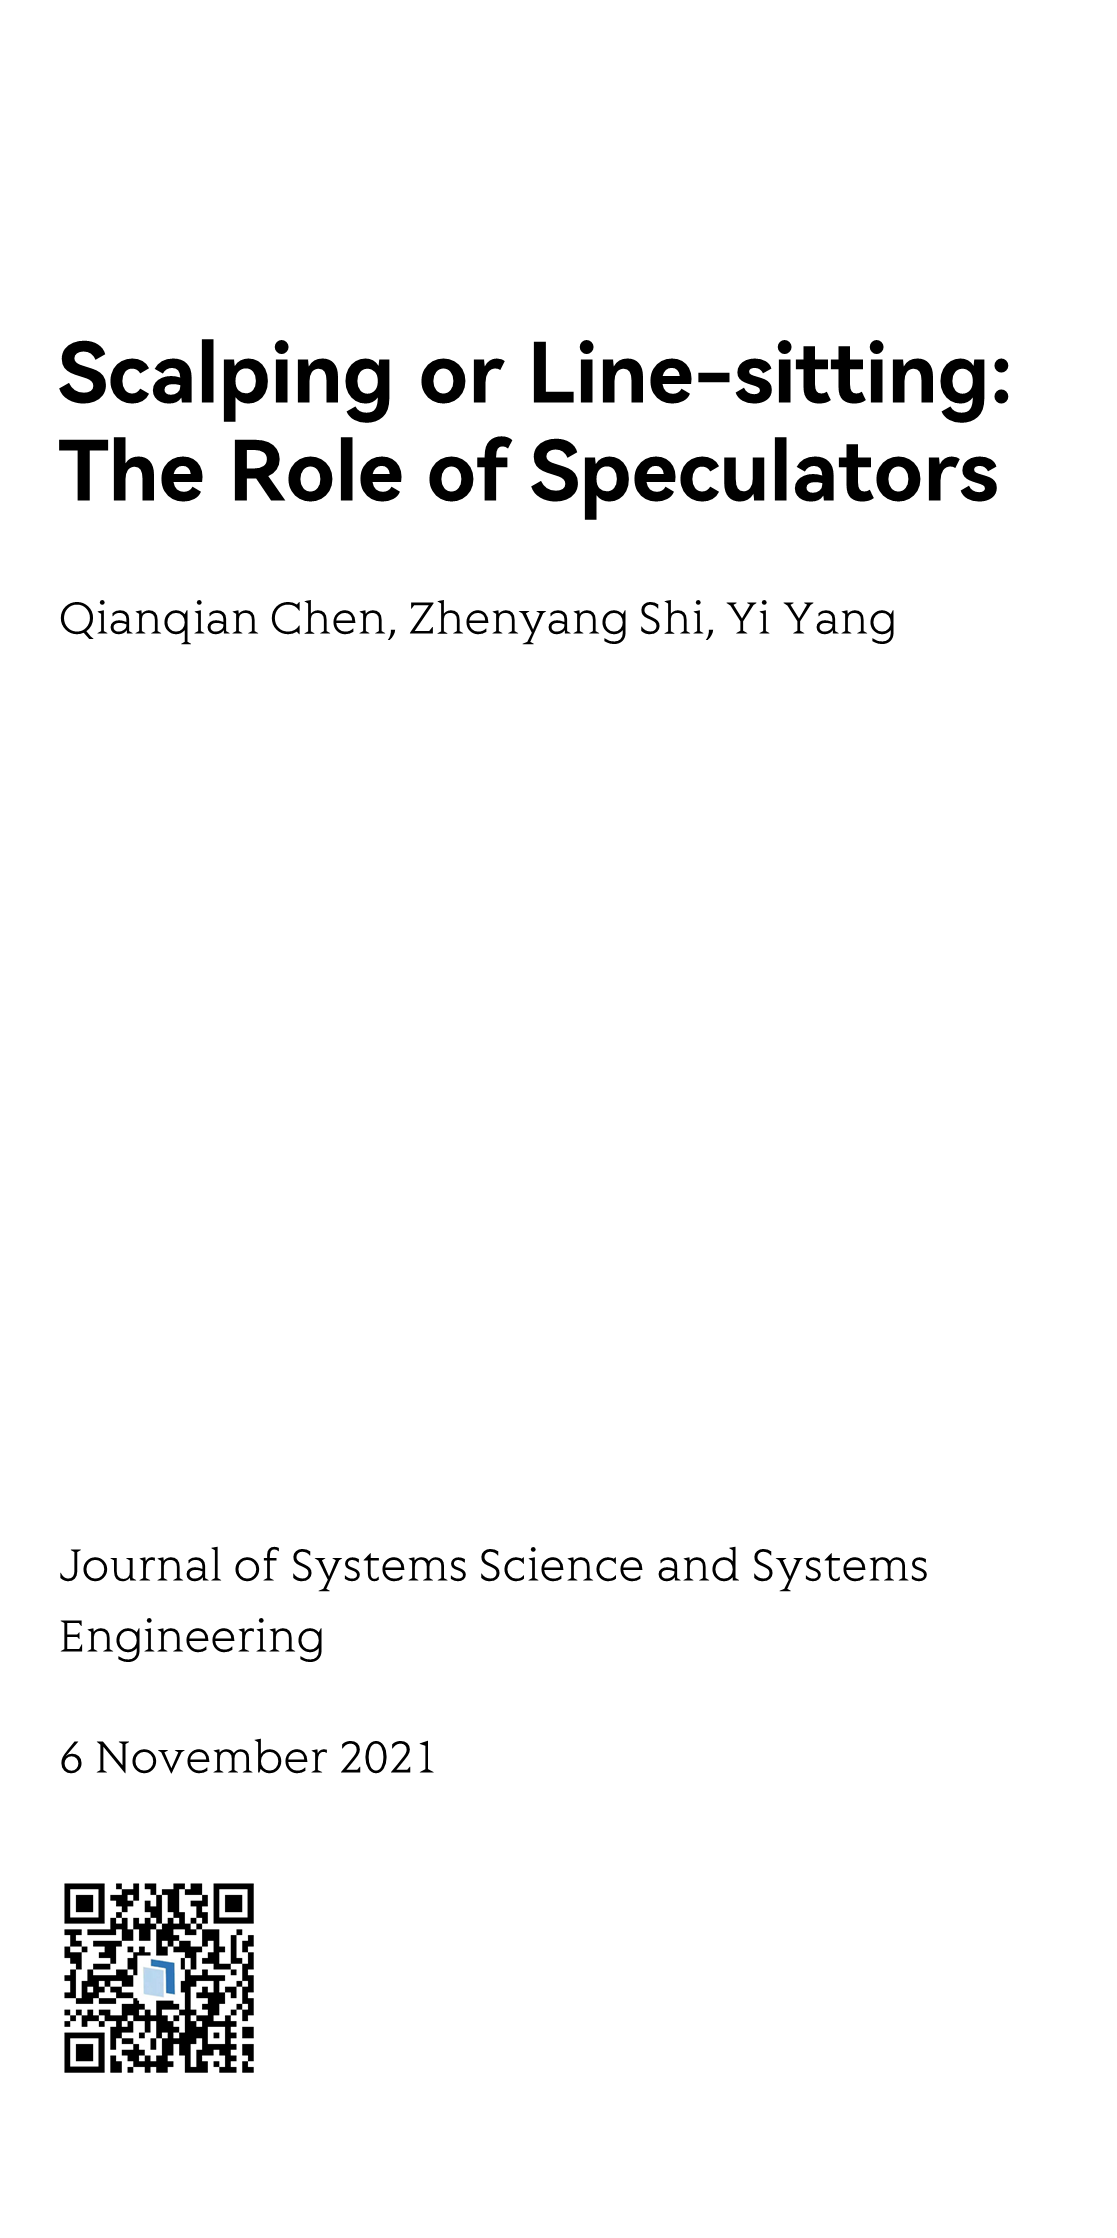 Journal of Systems Science and Systems Engineering_1